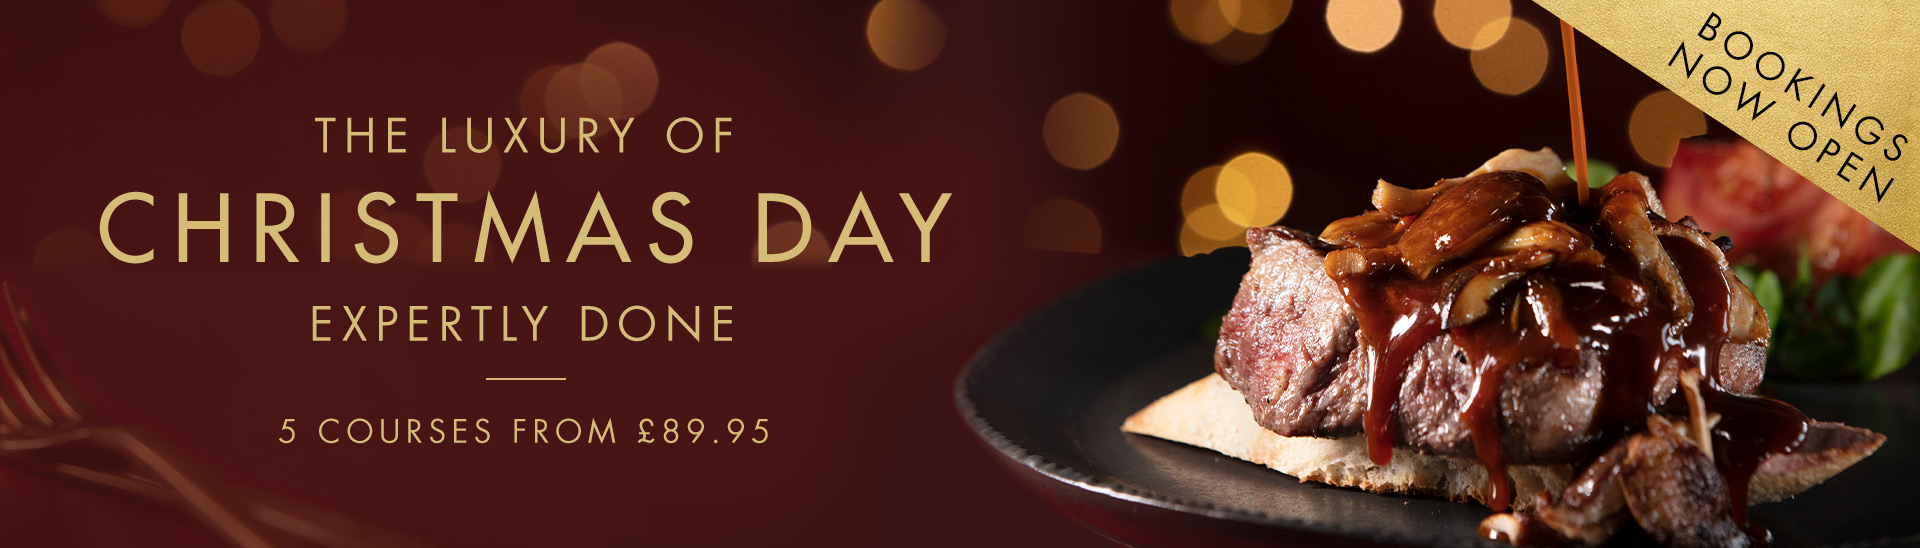 Christmas Day Menu at Miller & Carter Chelmsford • Book Now